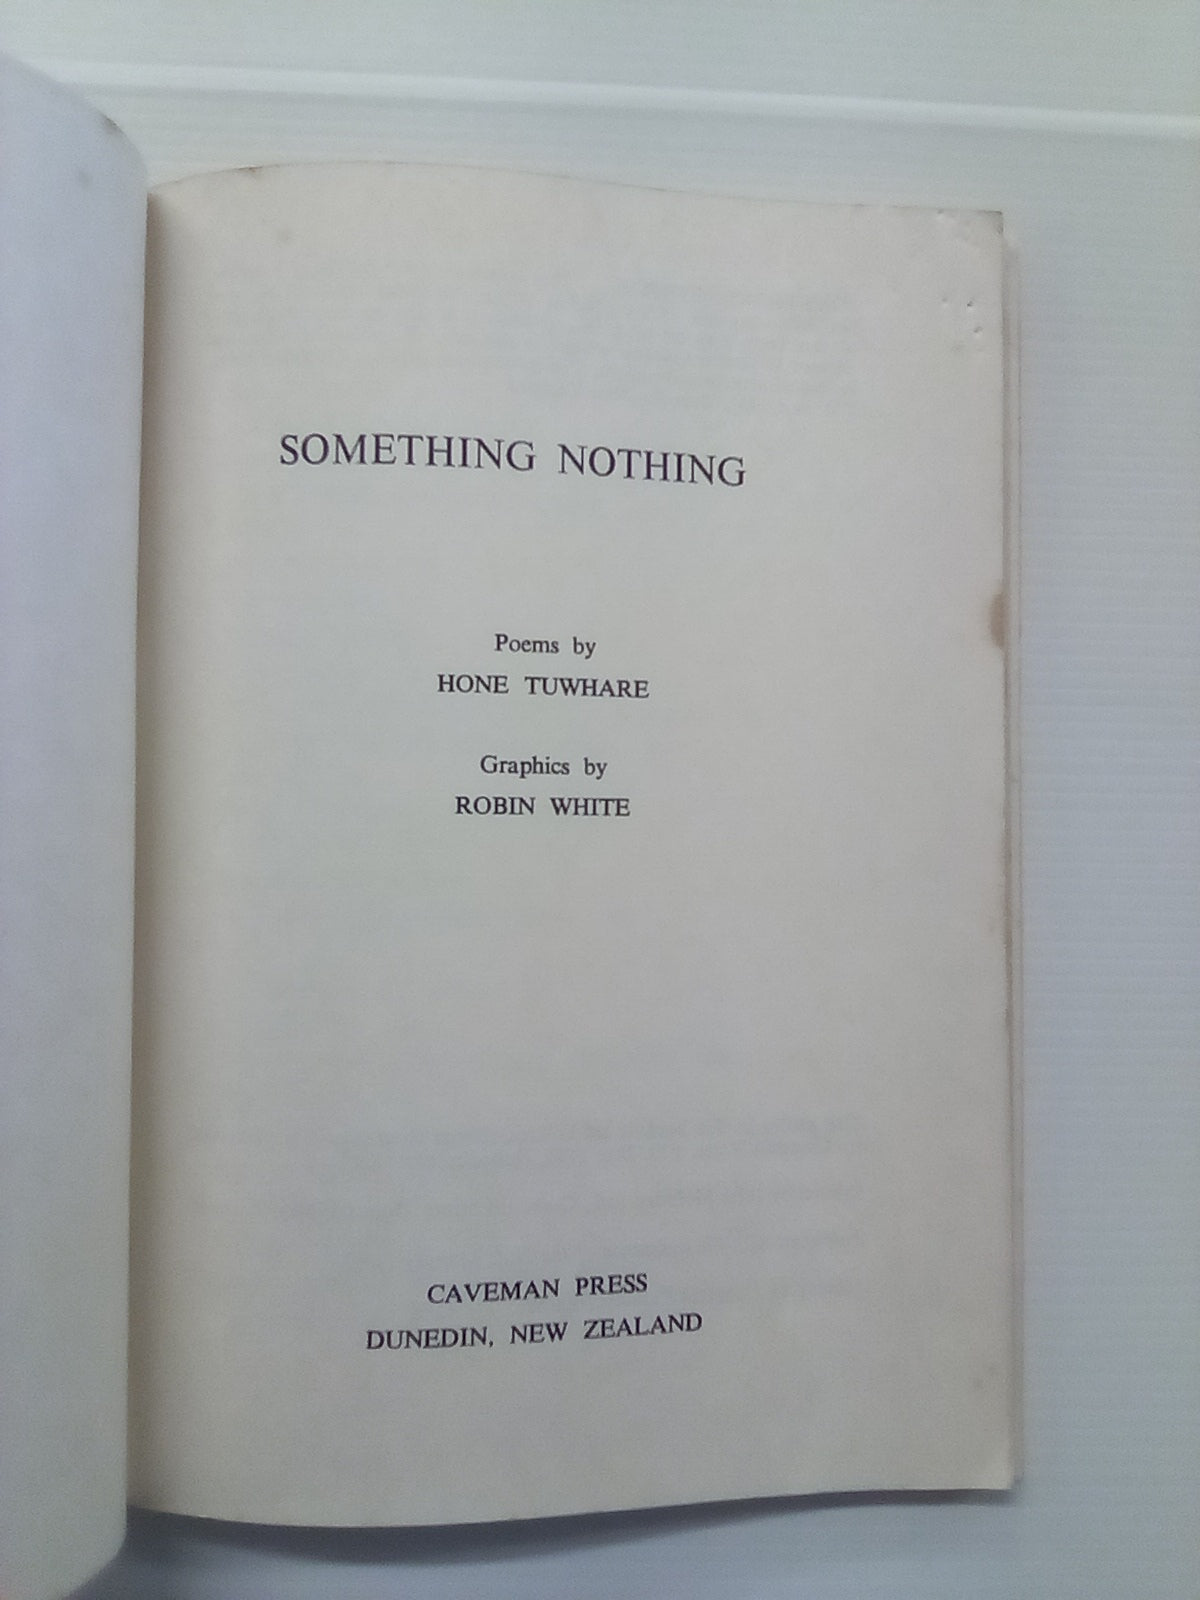 Something Nothing by Hone Tuwhare (1974) Illustrated by Robin White